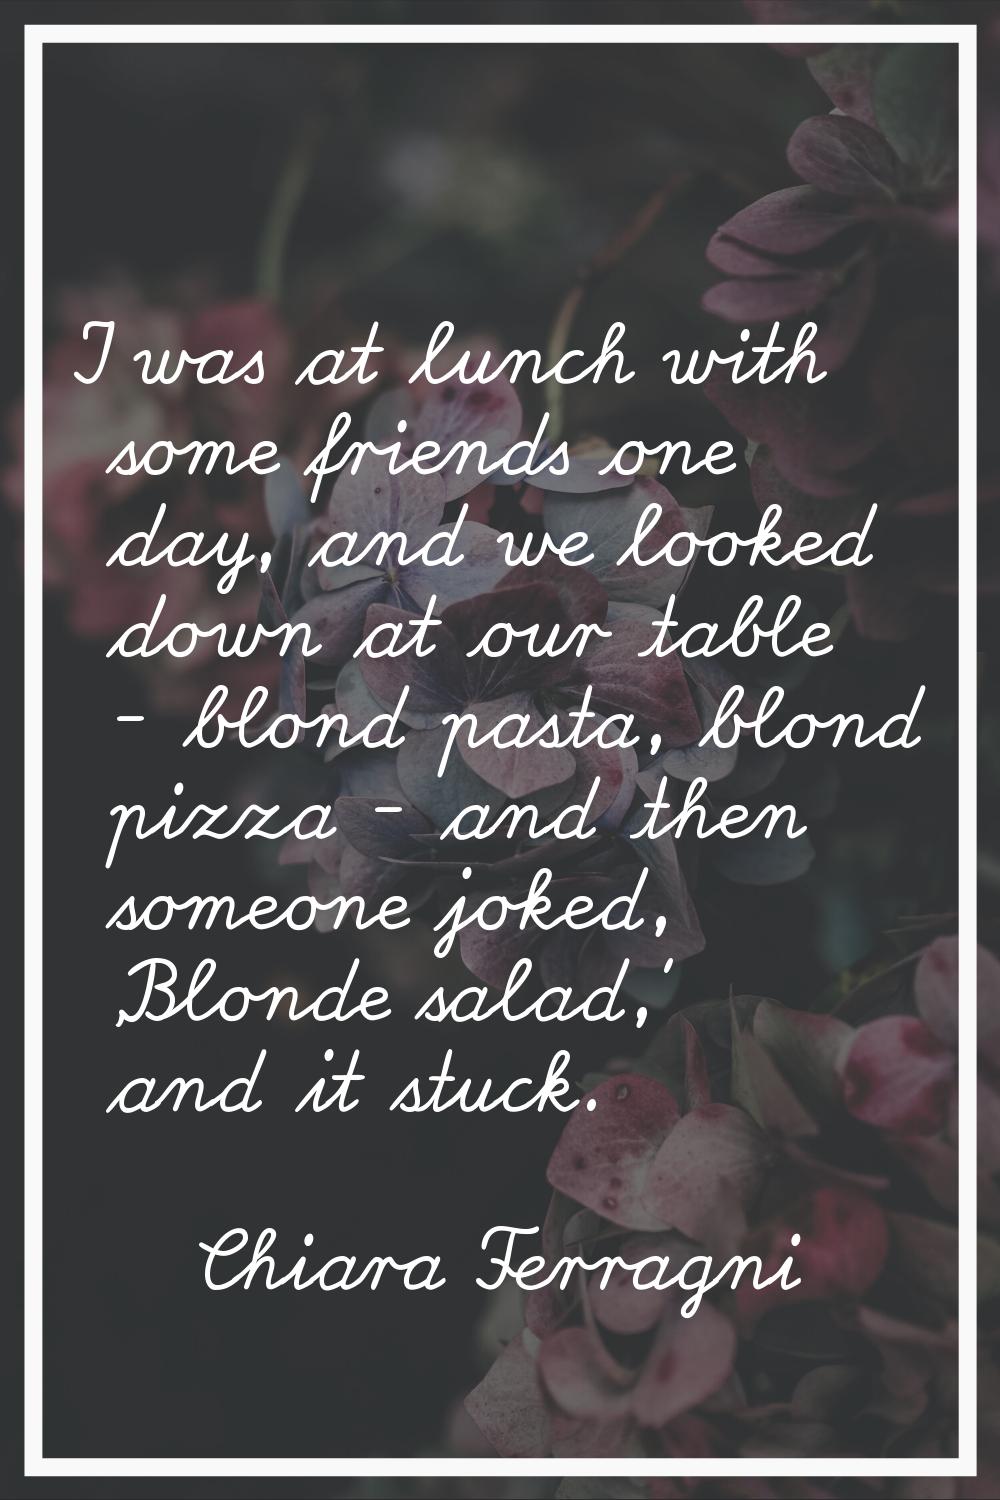 I was at lunch with some friends one day, and we looked down at our table - blond pasta, blond pizz